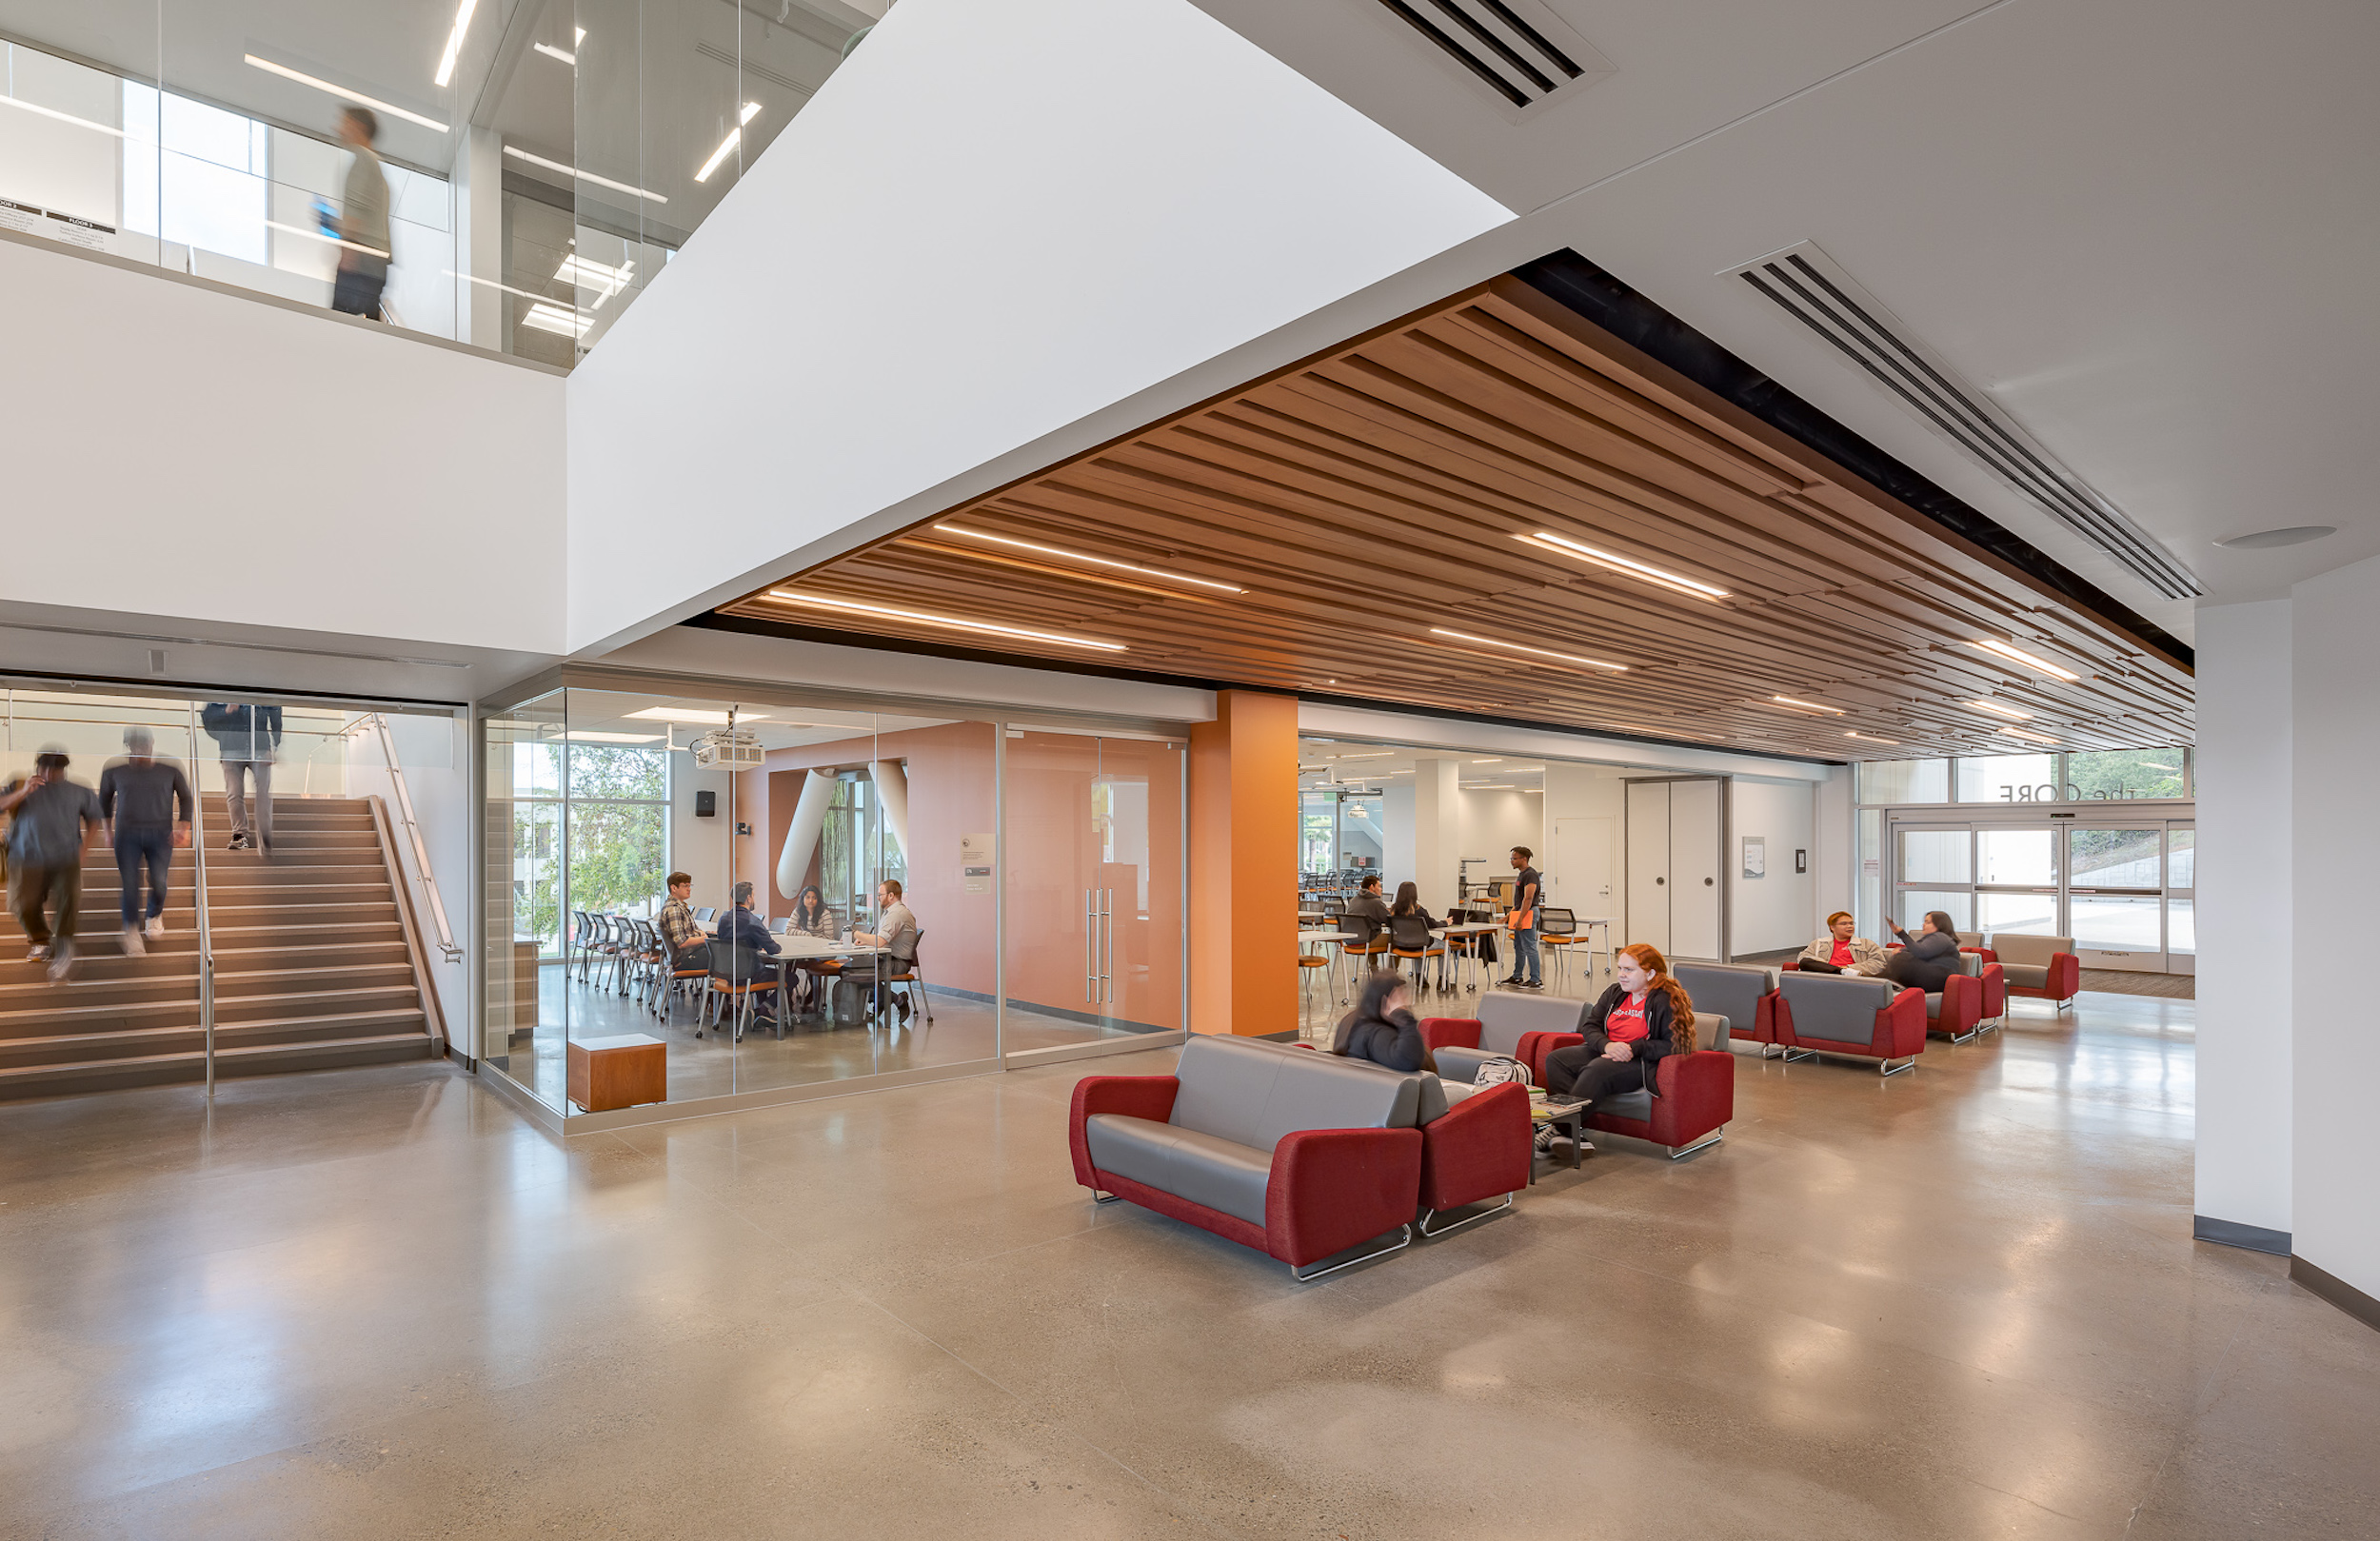 California State University, East Bay's Collaborative Opportunities for Research & Engagement (“CORE”) Building bridges upper and lower campuses Photos courtesy Anderson Brulé Architects